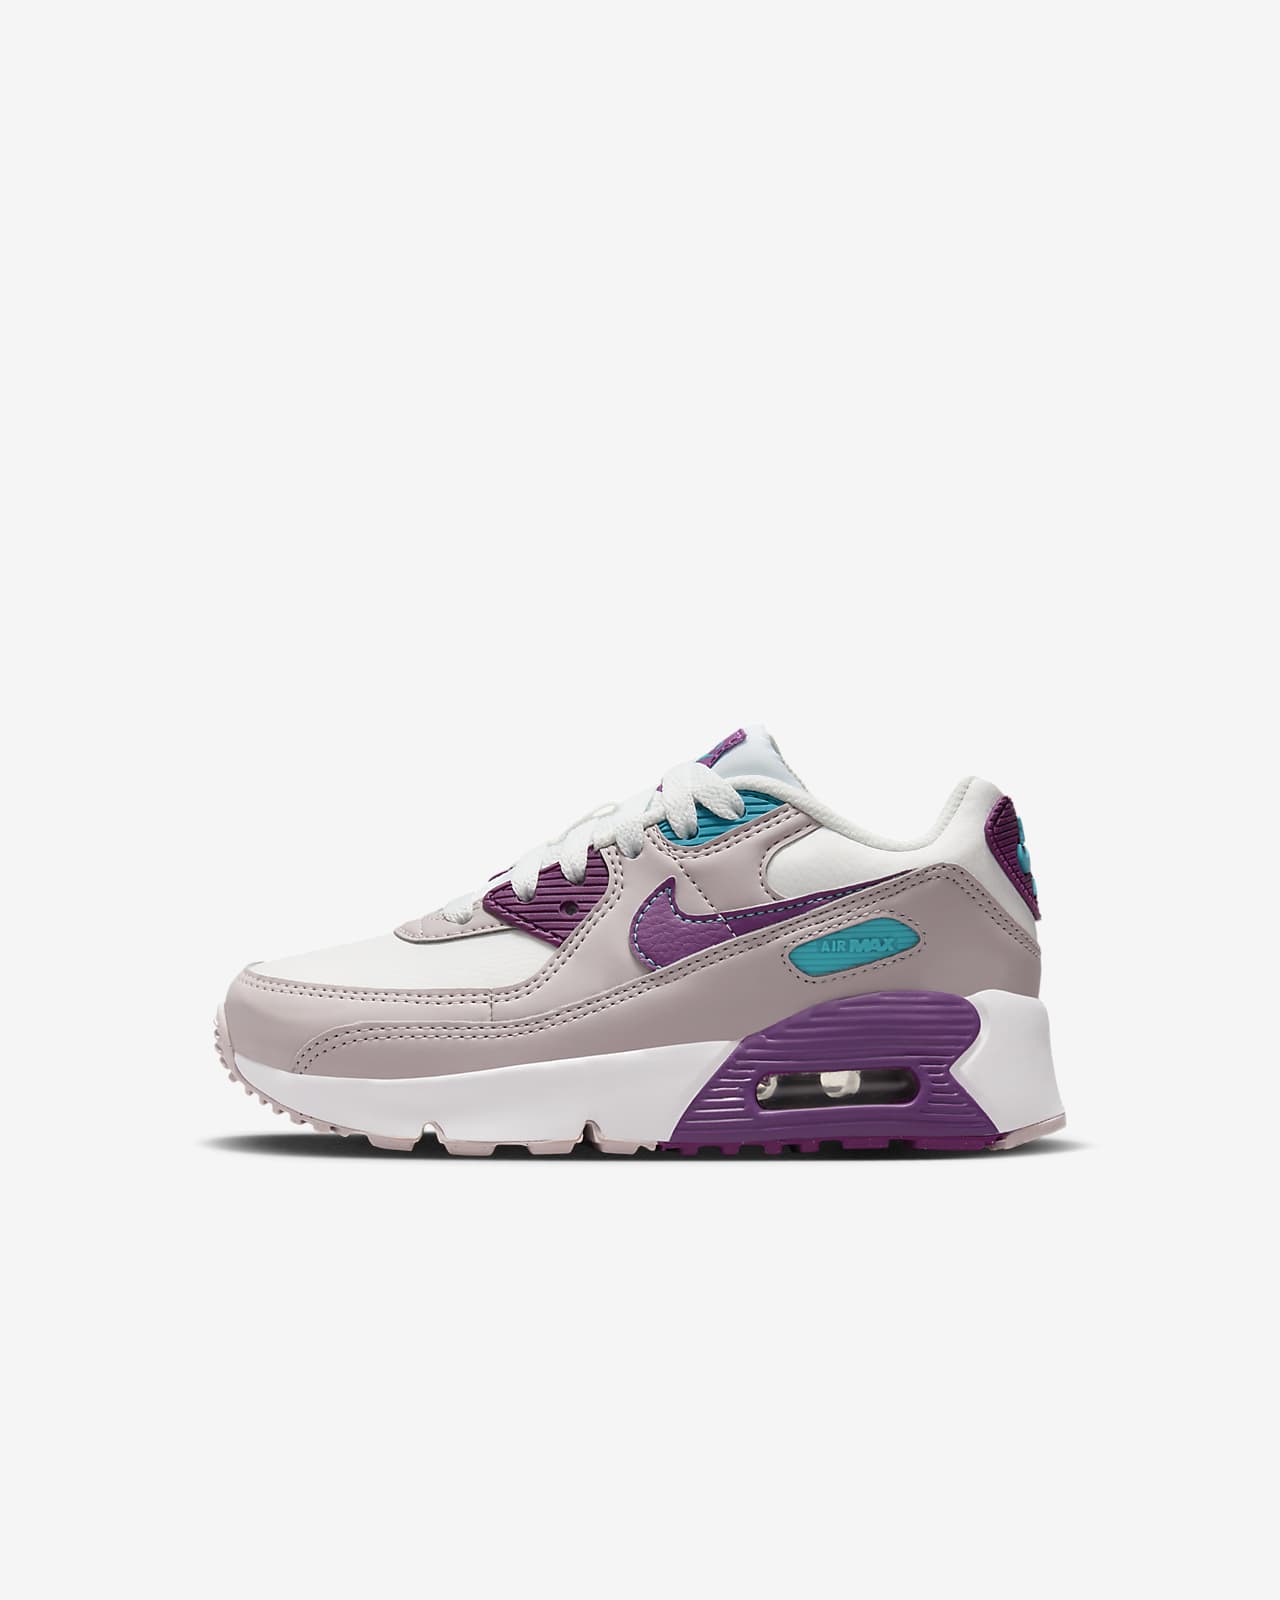 Nike Air Max 90 LTR Younger Kids' Shoes